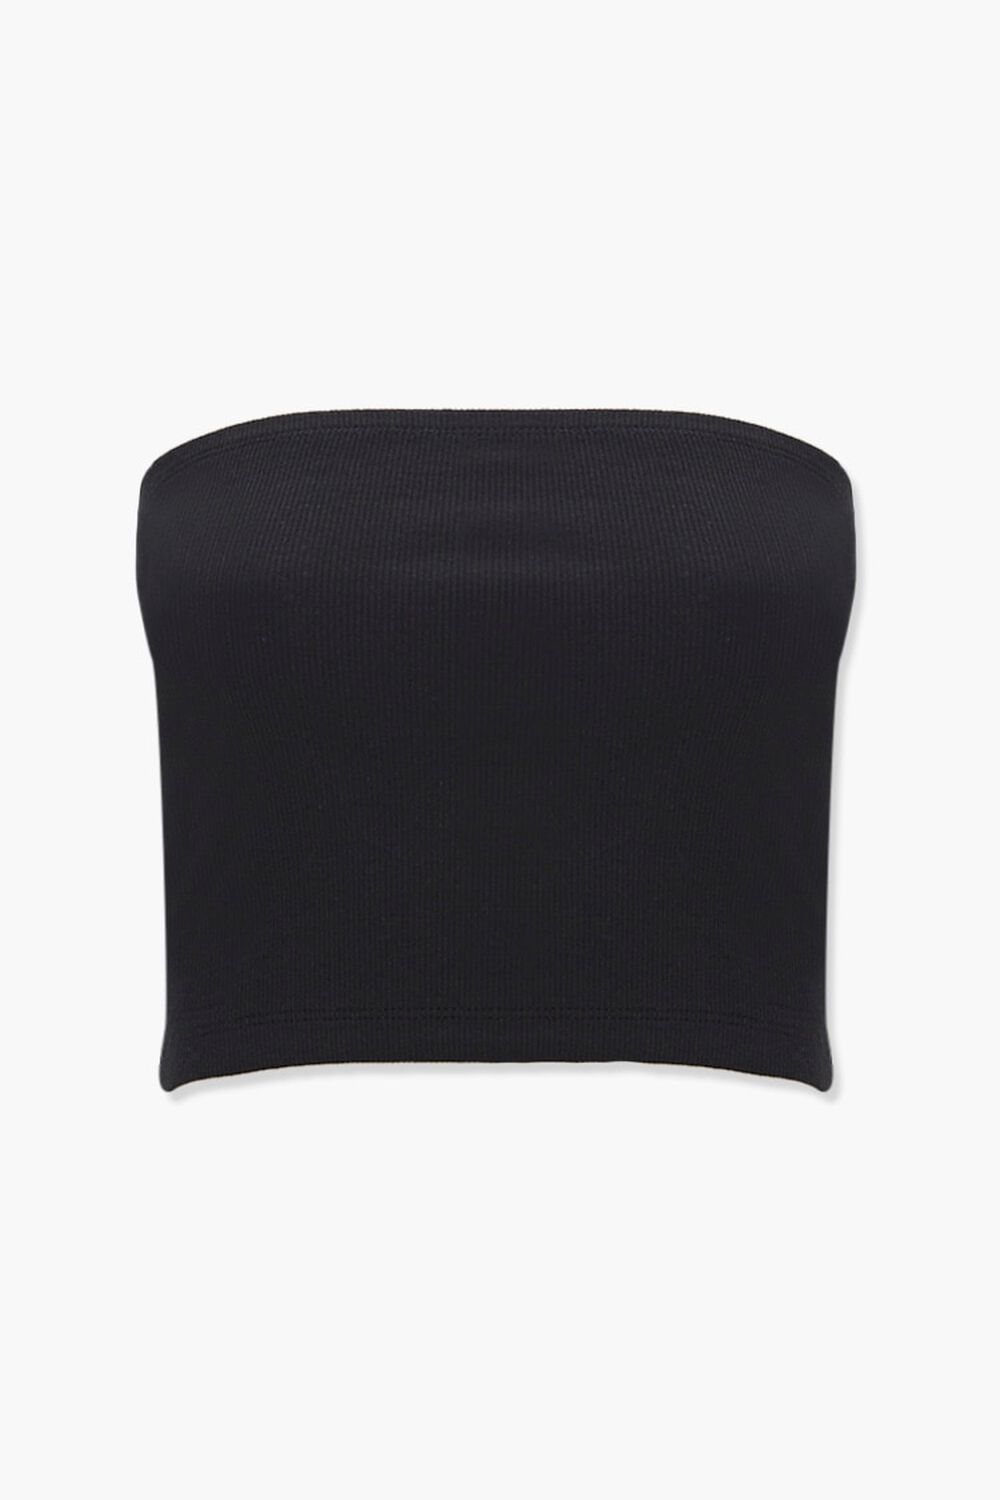 Cotton-Blend Cropped Tube Top, image 1